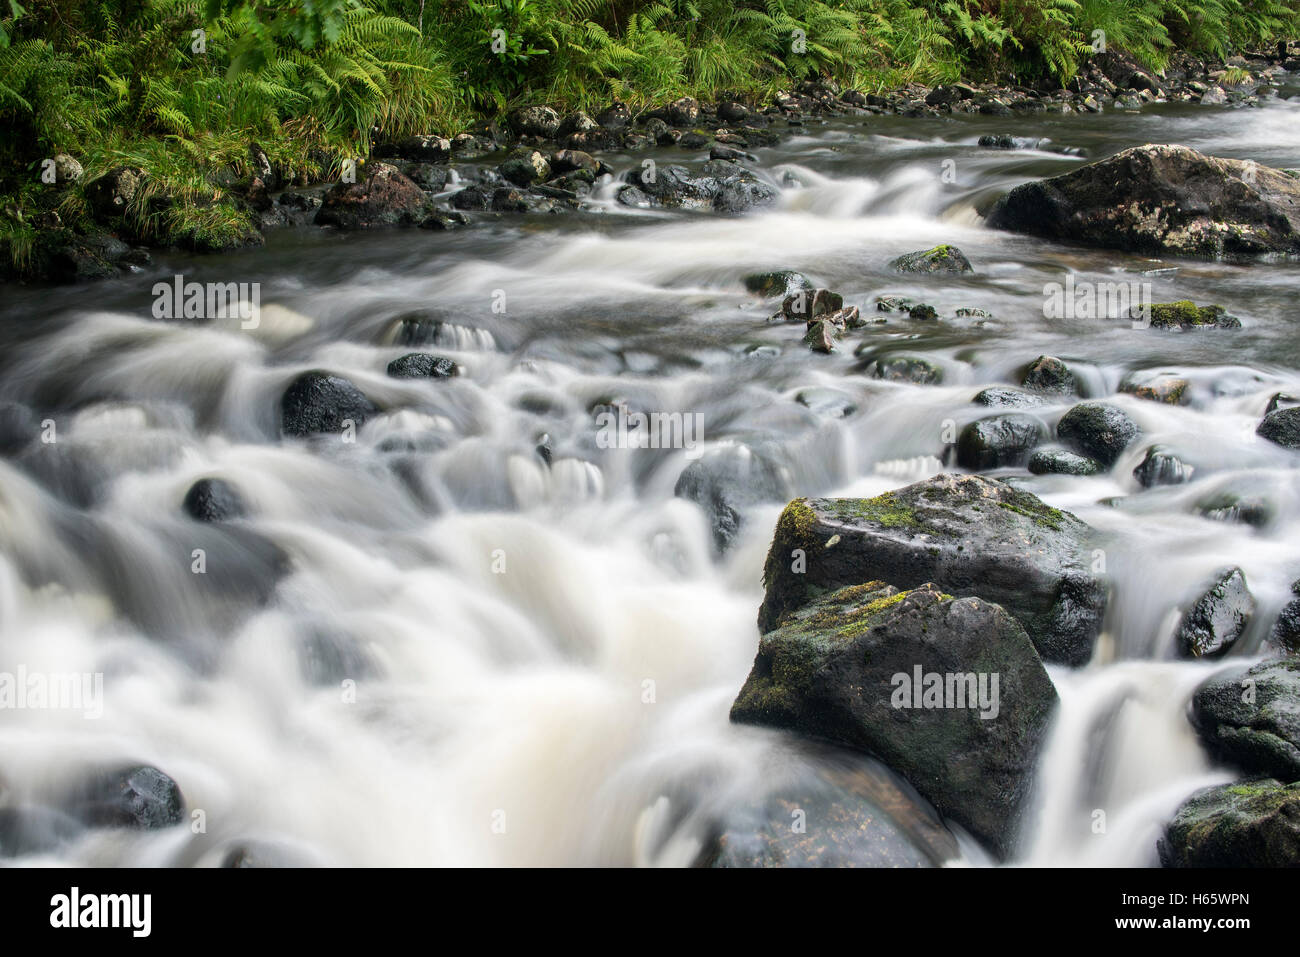 Detail of water flowing over boulders in the River Garry in Glengarry Forest, Lochaber, Scottish Highlands, Scotland Stock Photo